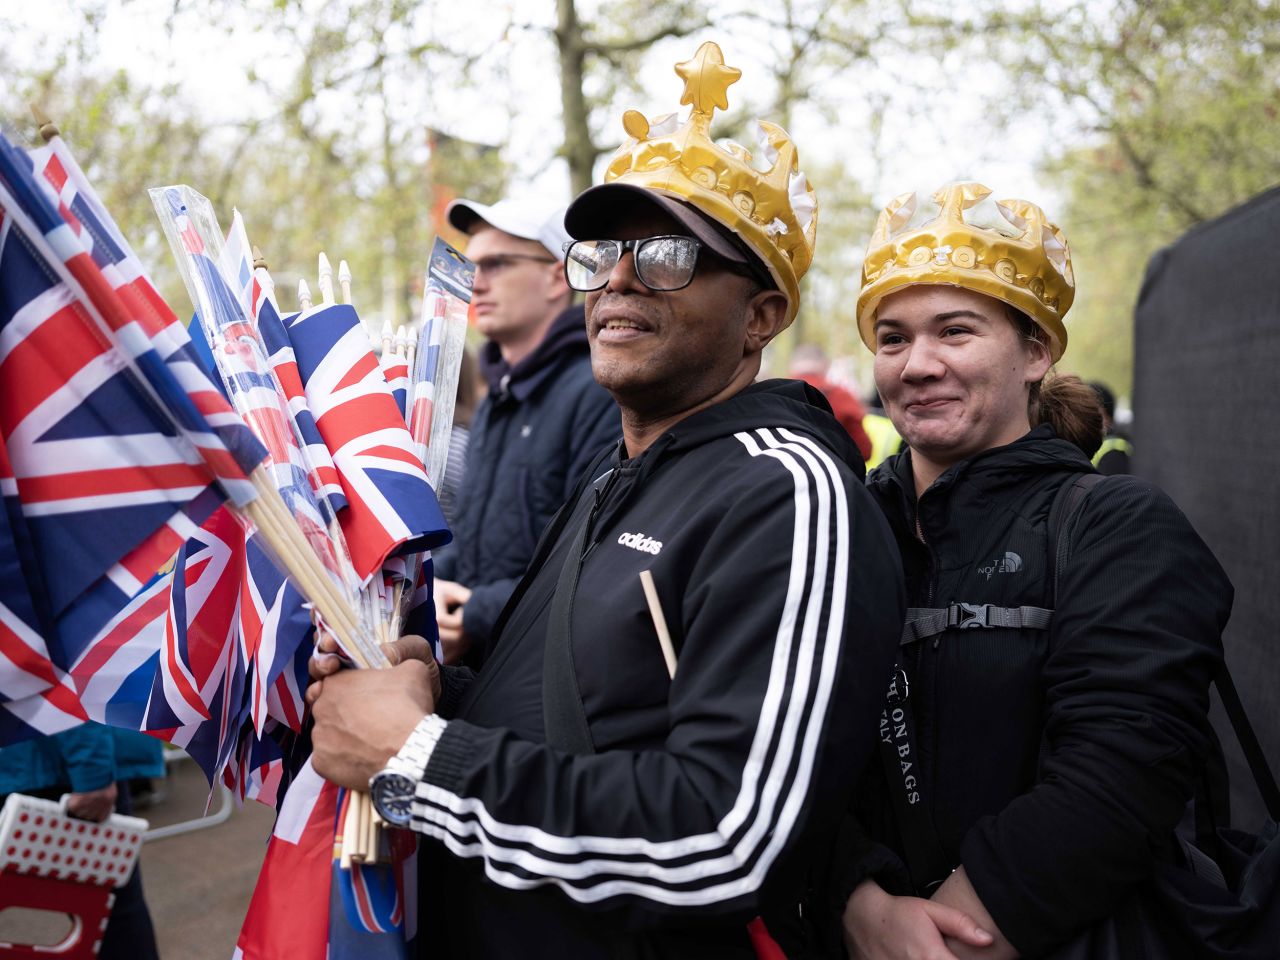 Paul, from London, was selling flags along the procession route — but he said business would have been better if he could have gotten reception for his card swiper. "I'd be here if I was working or not," he said. "I came to the Queen's birthday every year and I love the royals. Charles is all right."